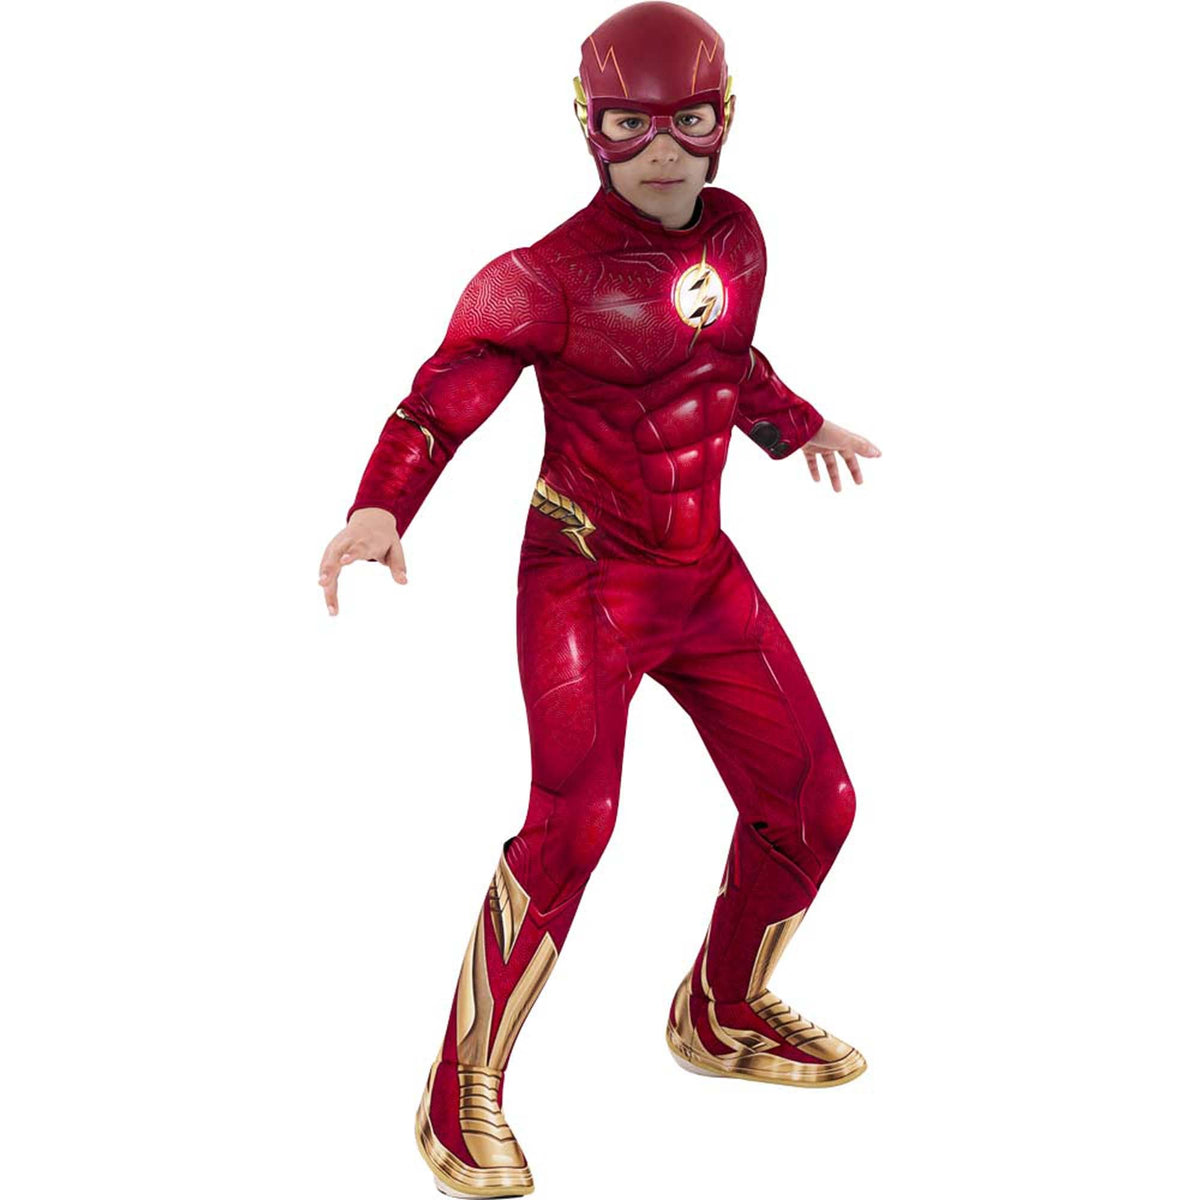 RUBIES II (Ruby Slipper Sales) Costumes DC The Flash Costume for Kids, Red Padded Jumpsuit